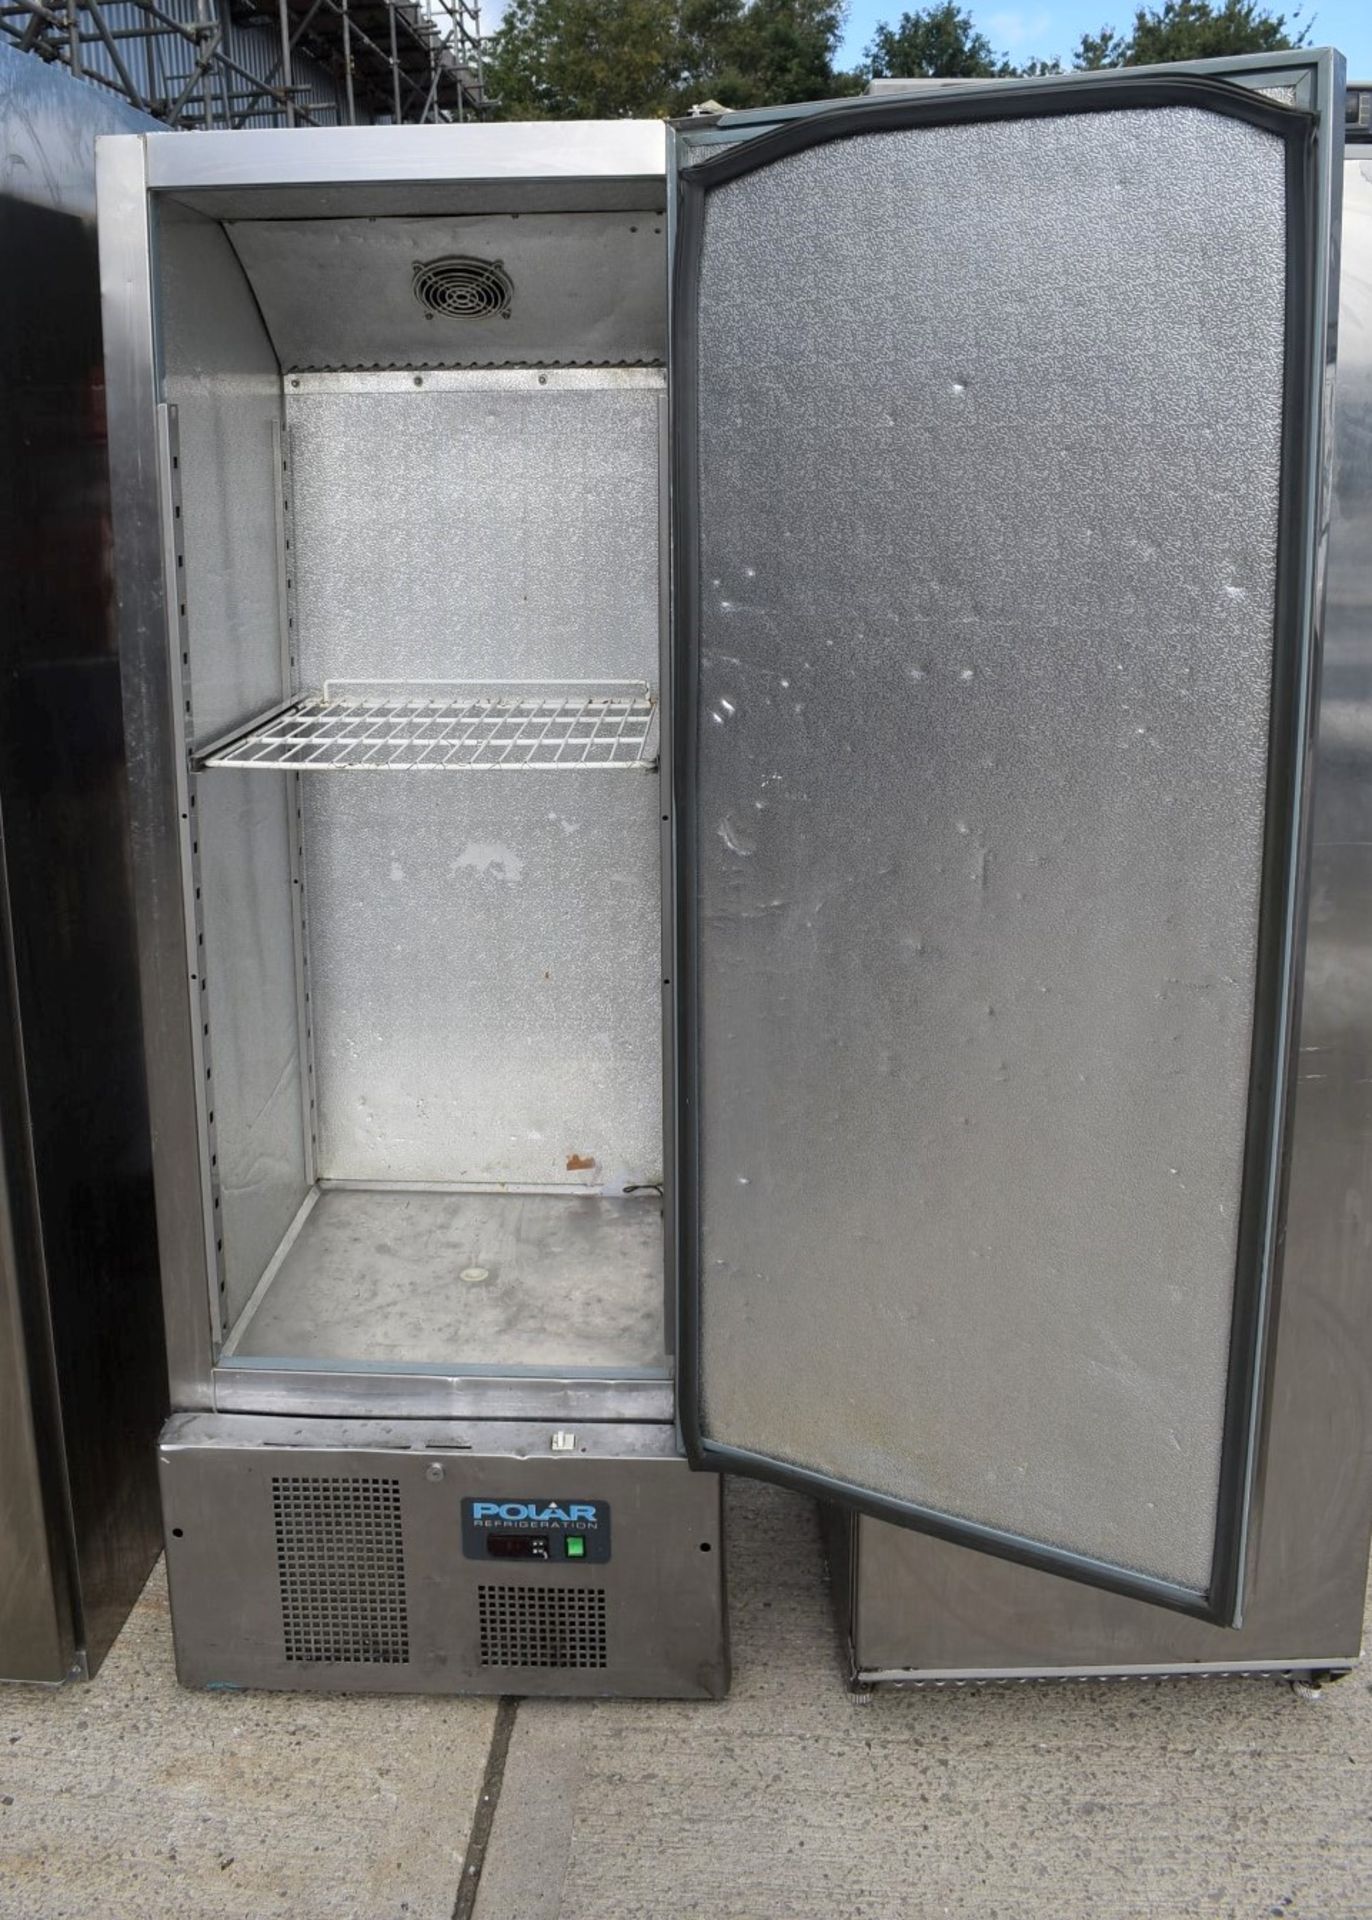 1 x Polar G590 Upright Commercial Fridge - Size: H188 x W65 x D70 cms - Recently Removed From a Dark - Image 6 of 6